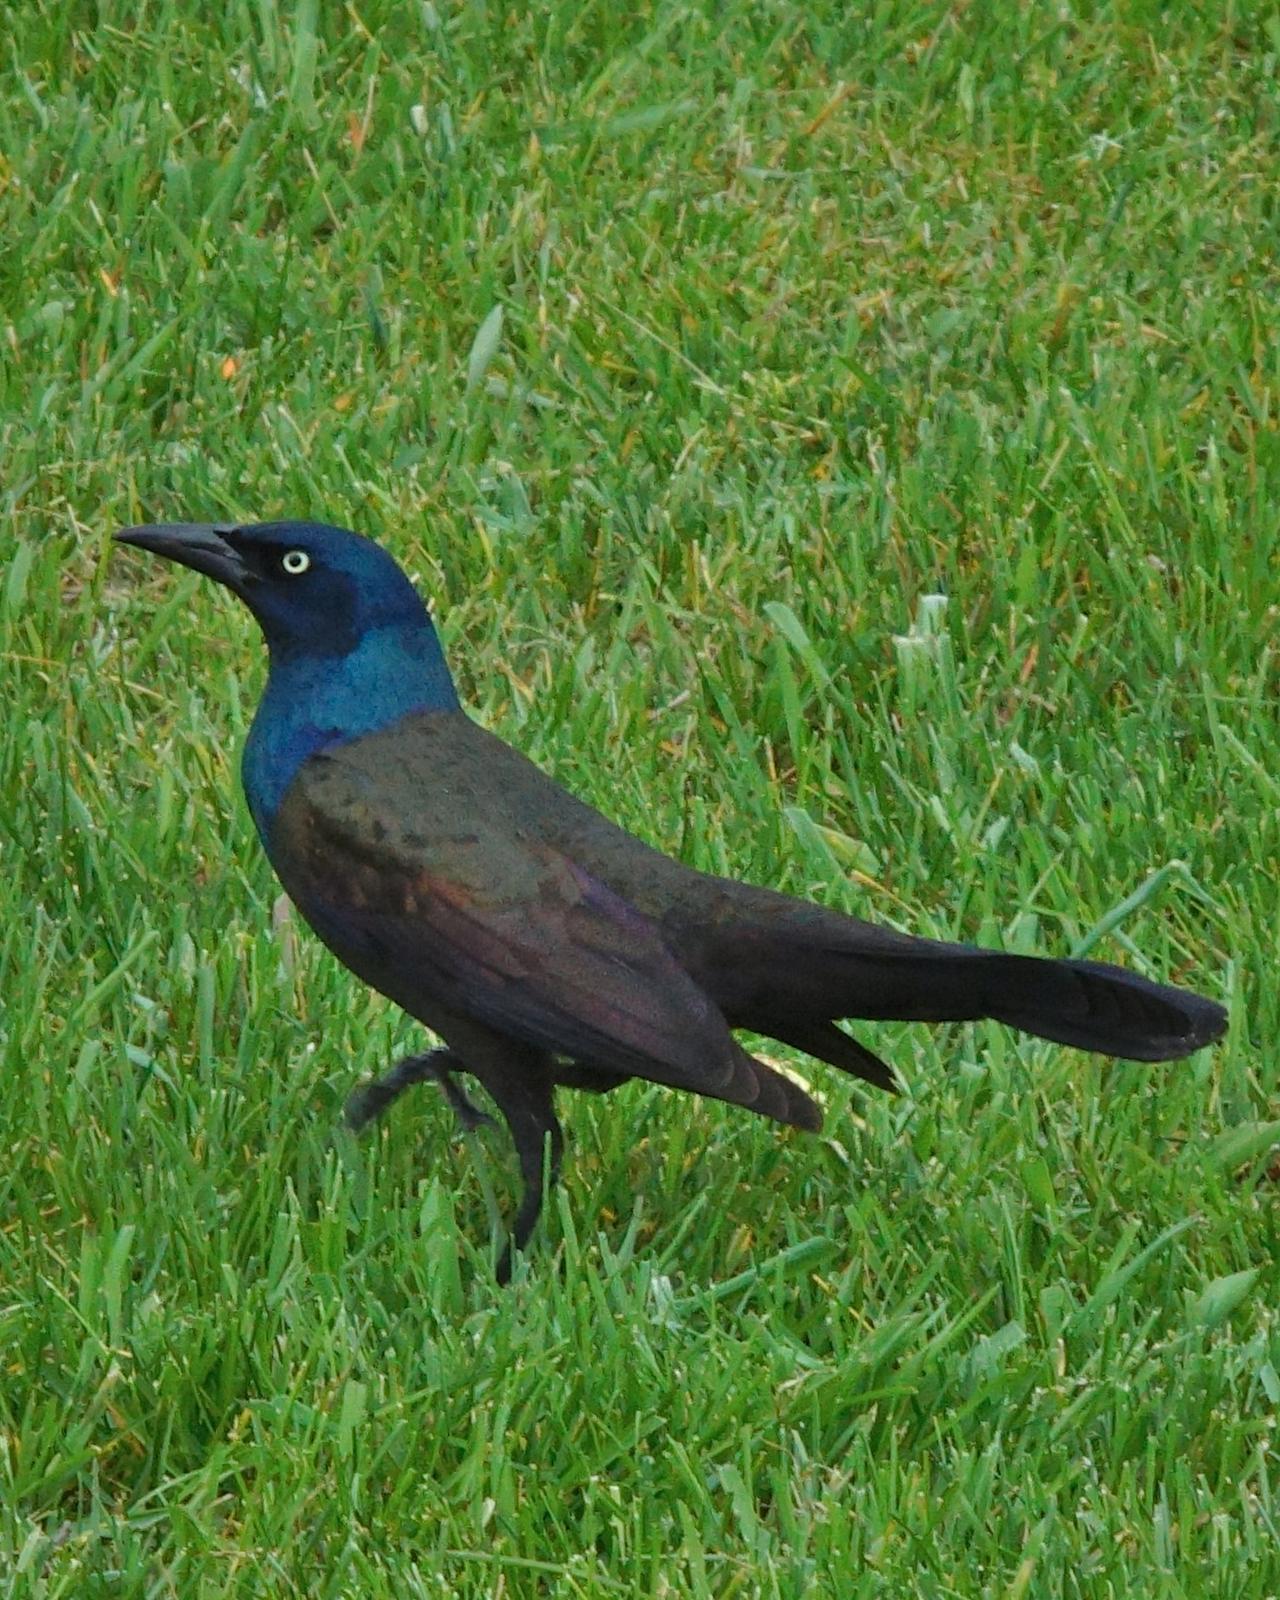 Common Grackle Photo by Gerald Hoekstra